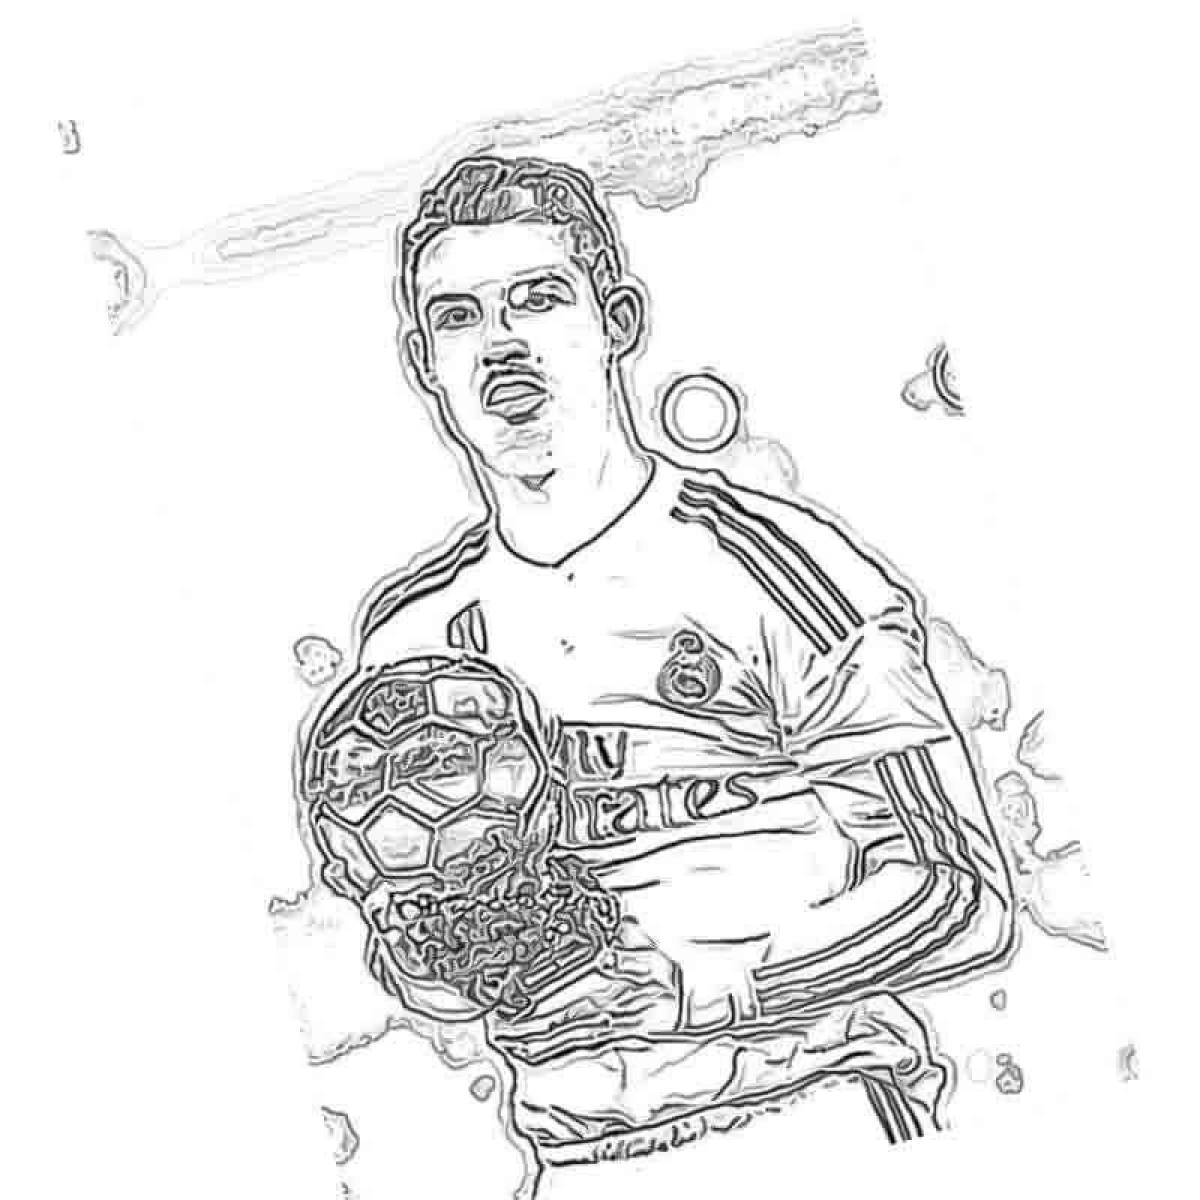 Charming ronaldo and messi coloring book